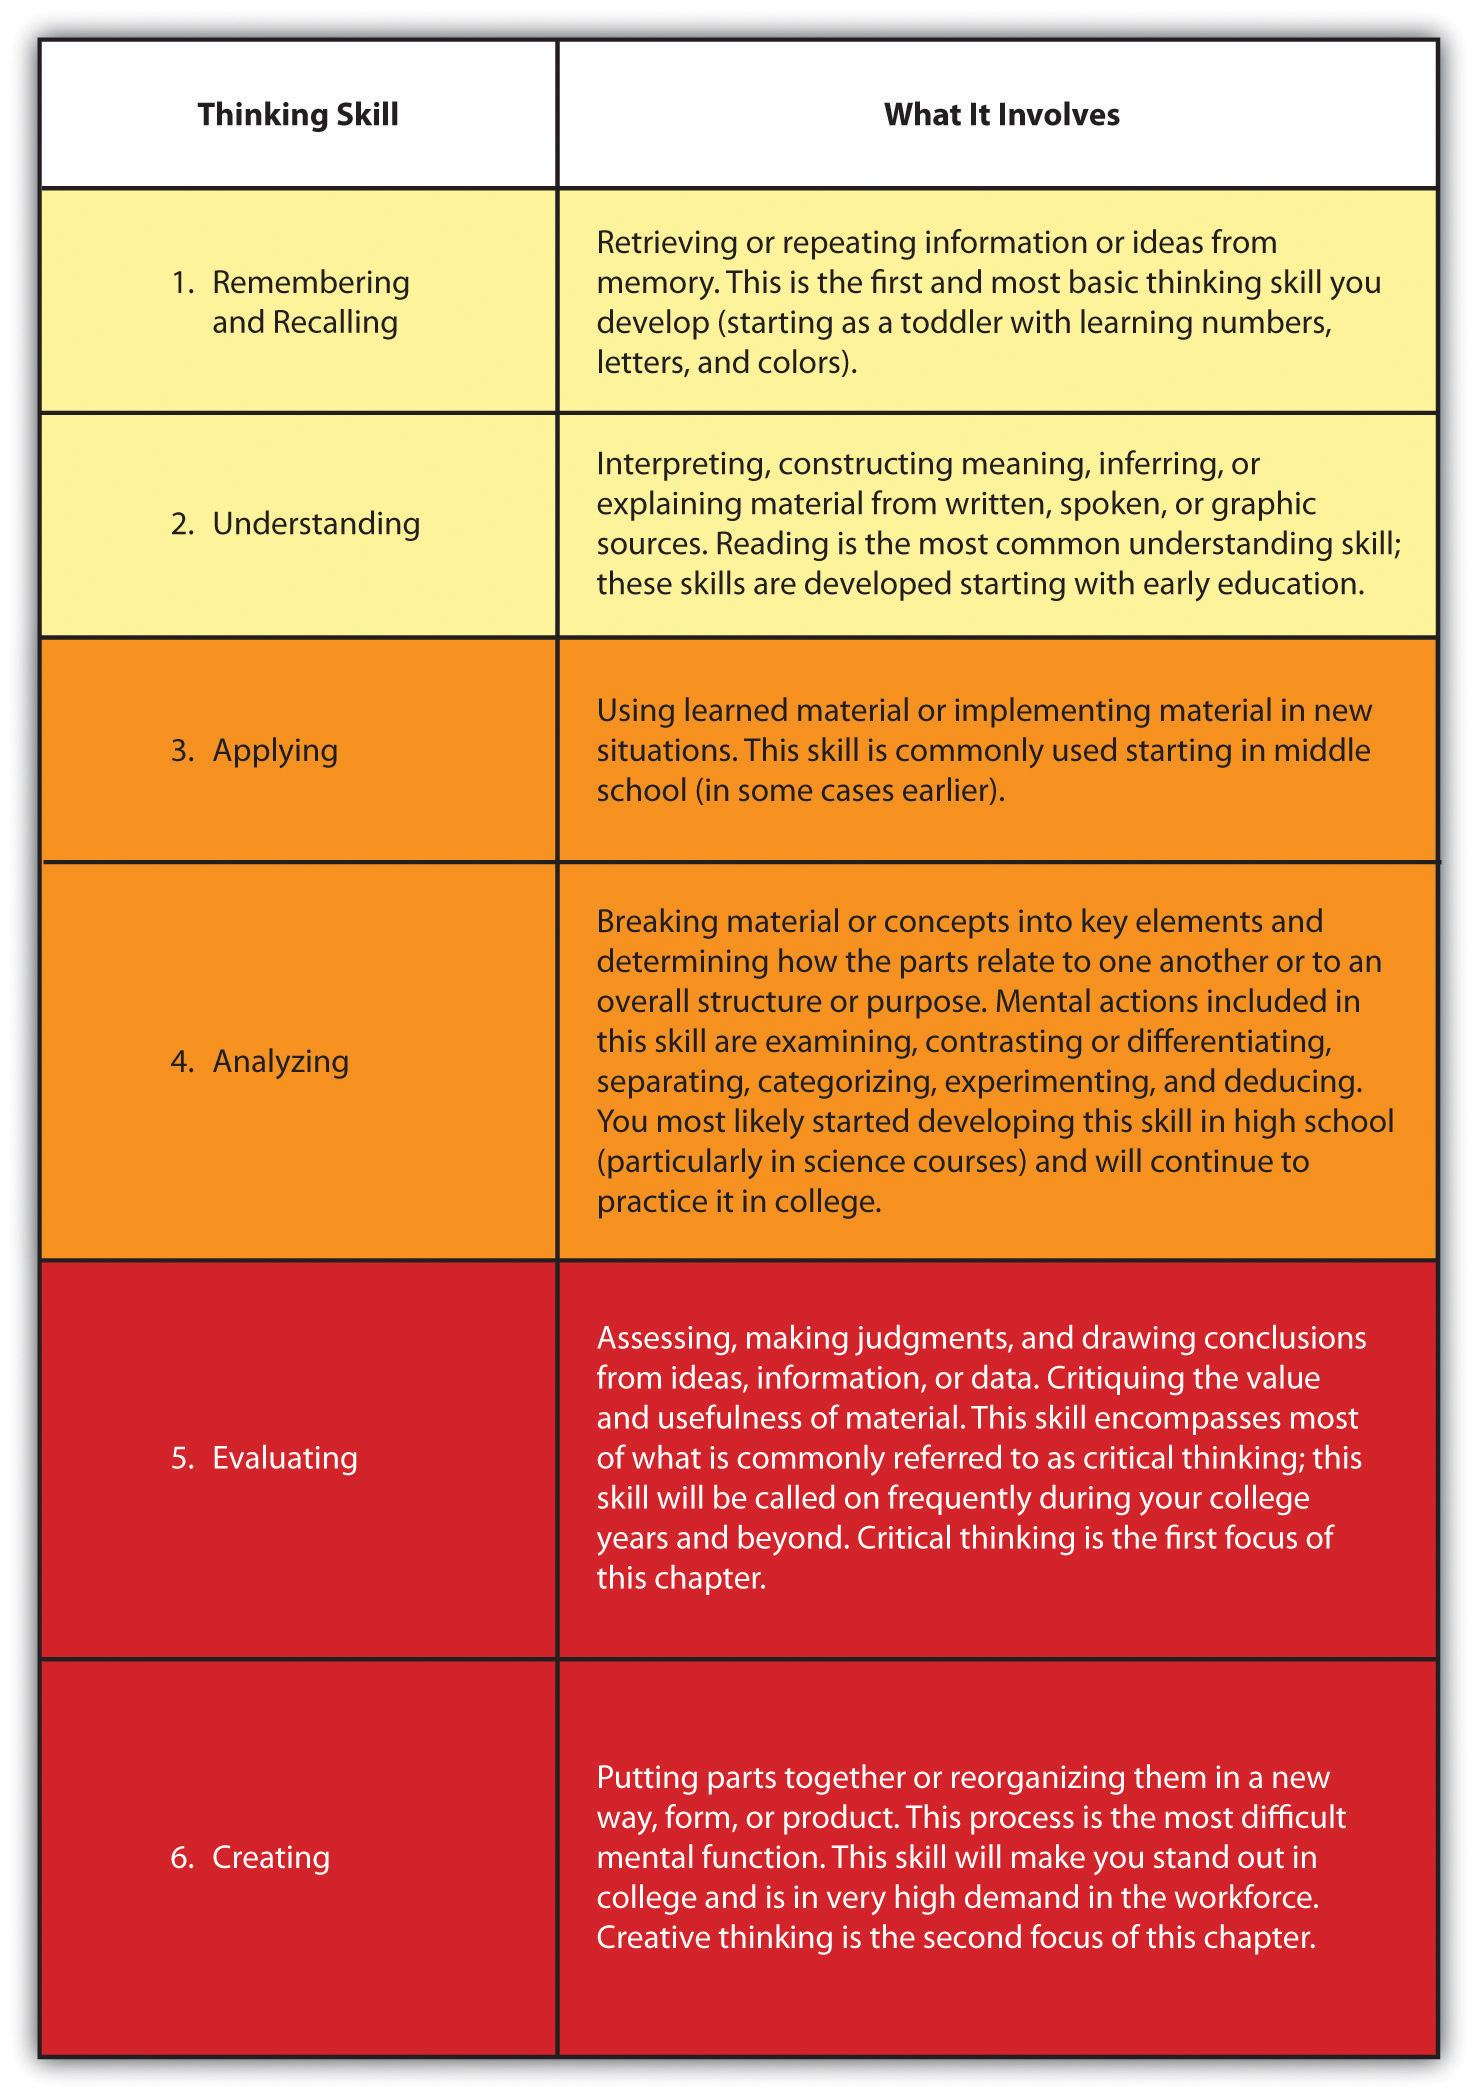 Table showing Bloom's Taxonomy Skills and Descriptions